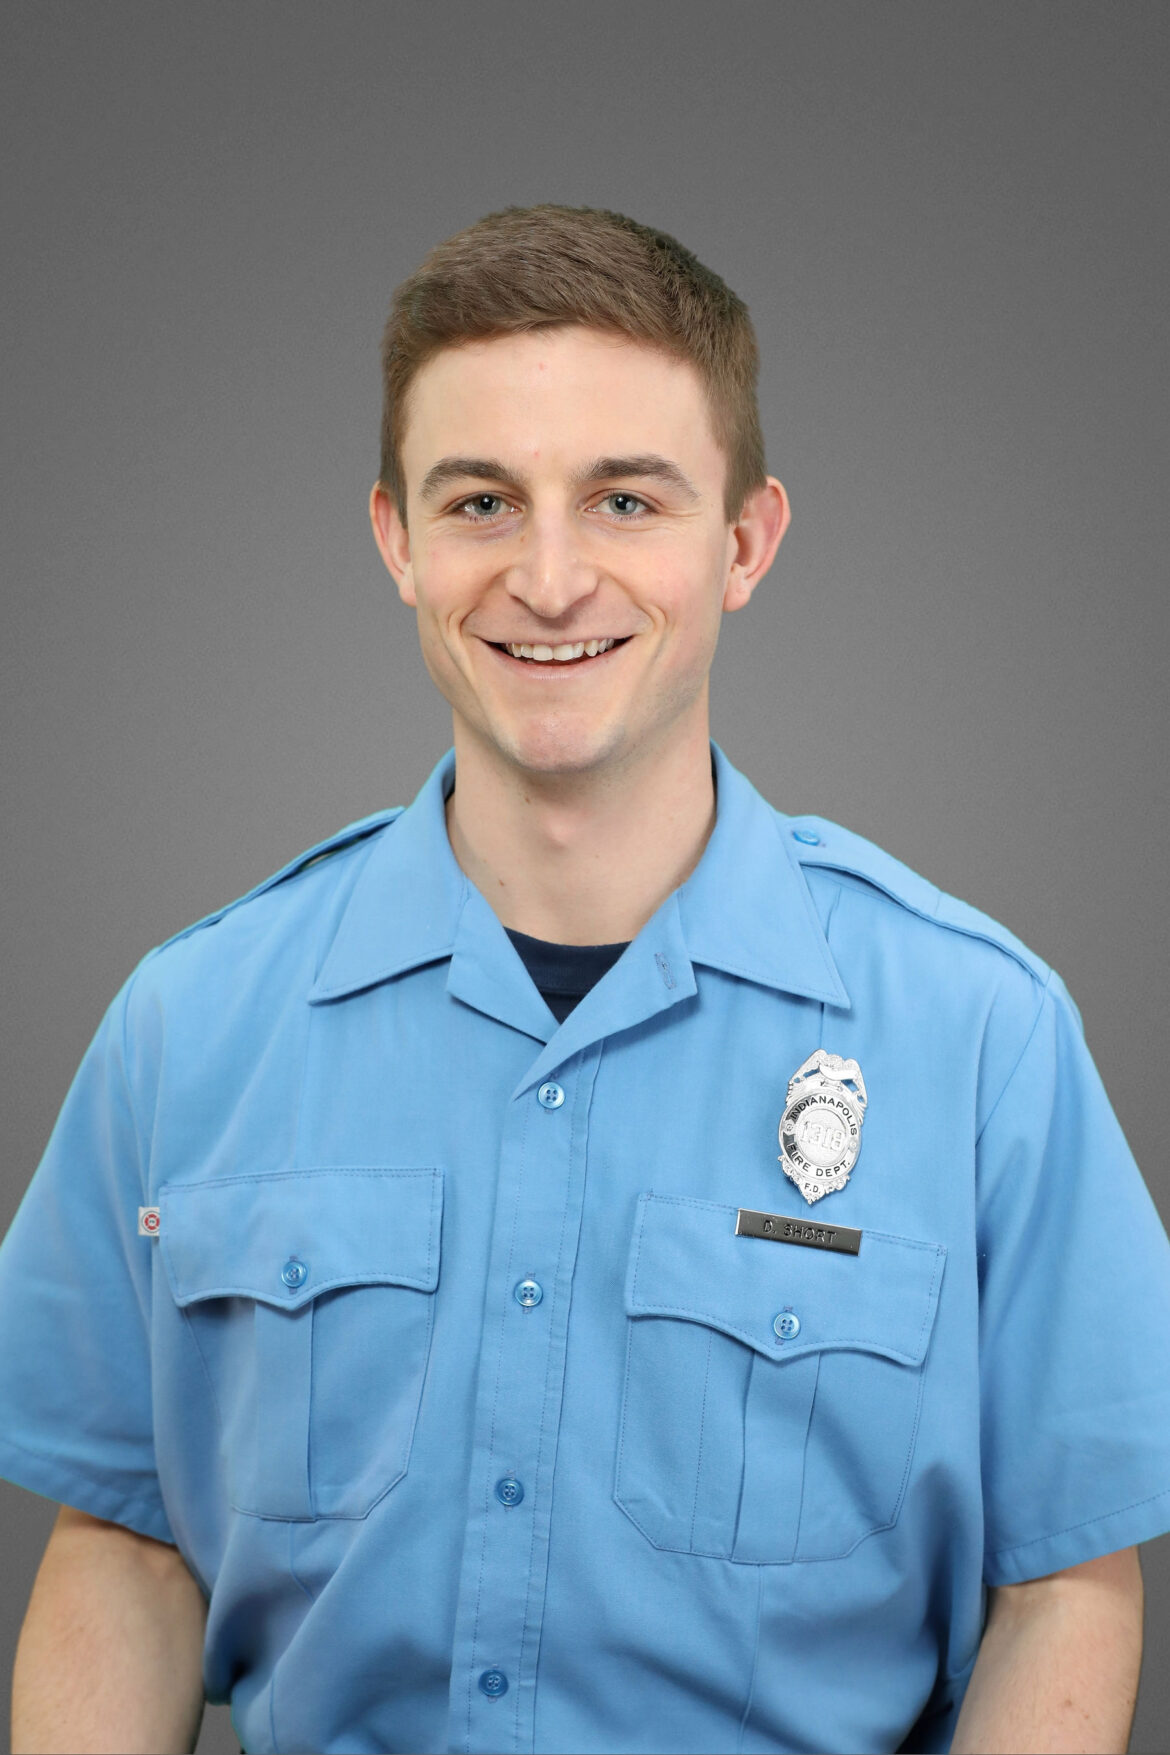 Indianapolis recruit firefighter killed in vehicle accident